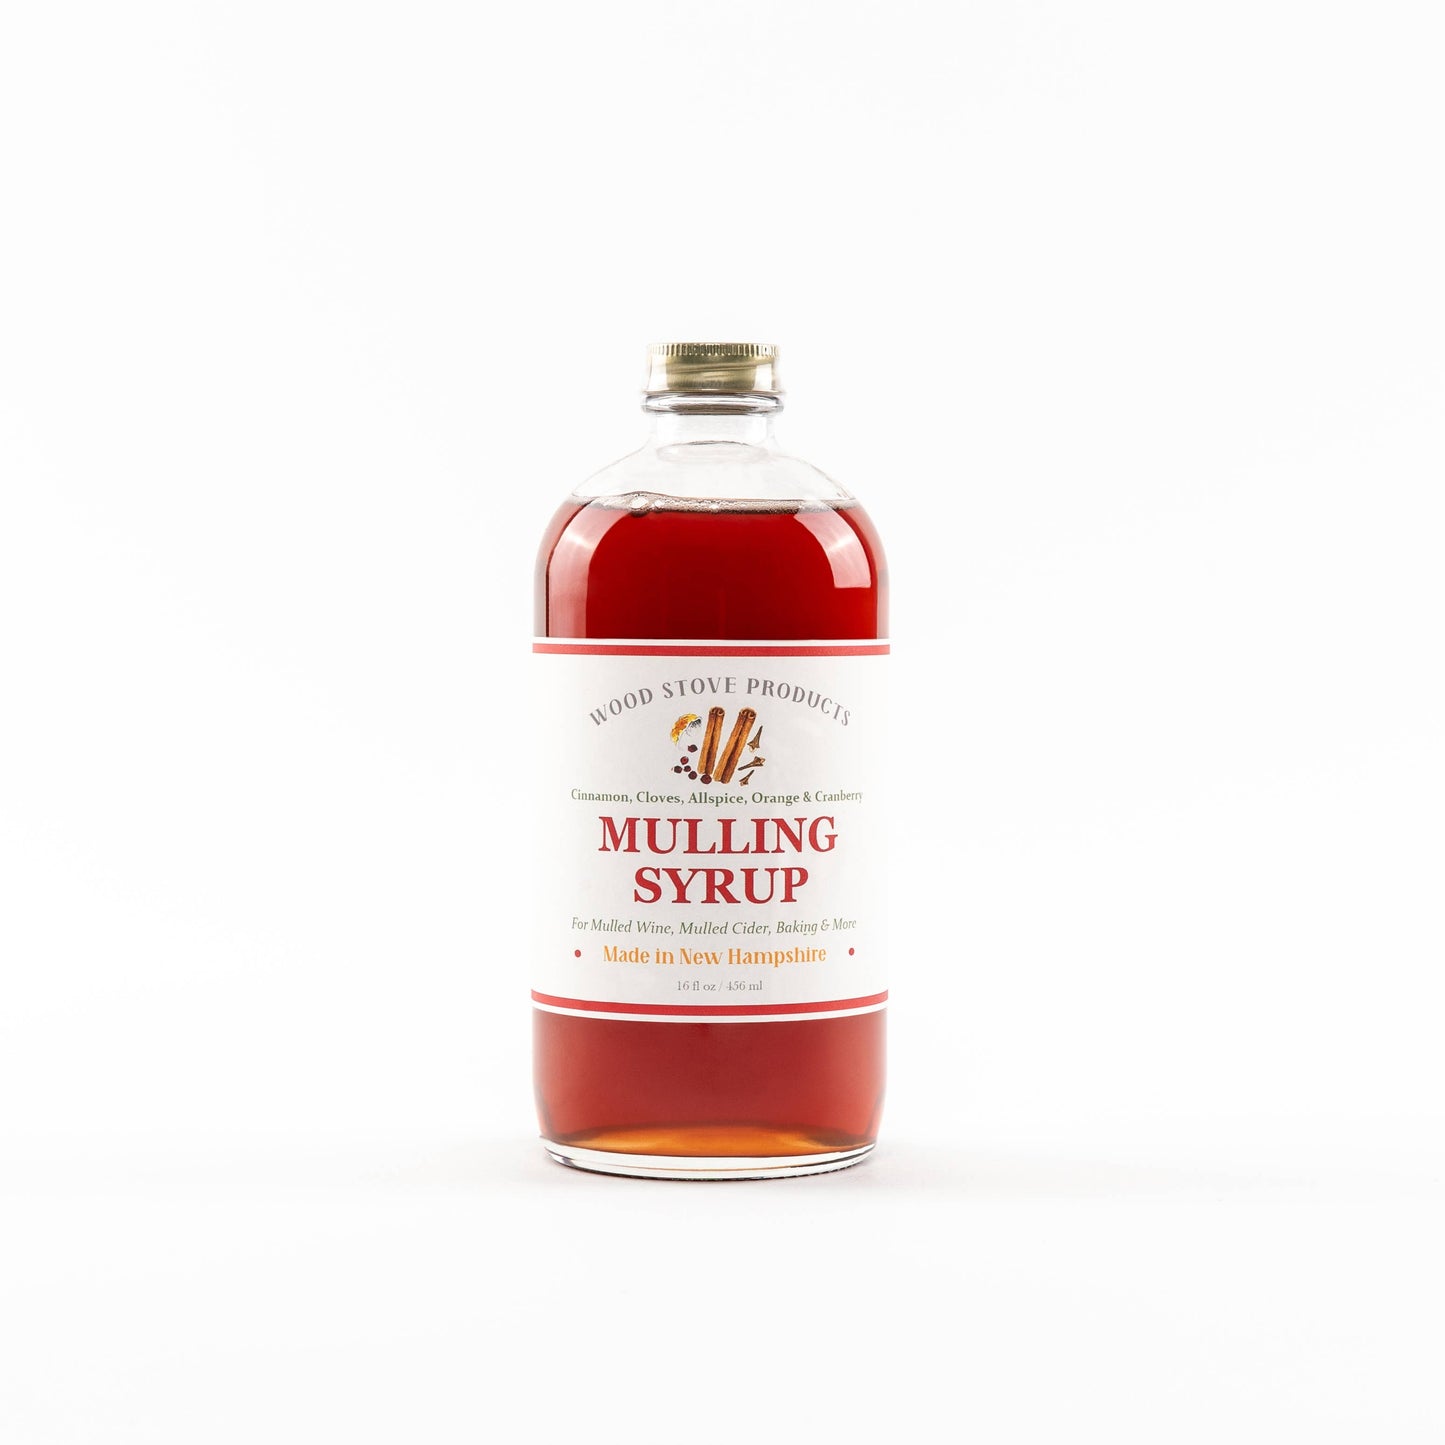 Load image into Gallery viewer, Mulling Syrup, 16 fl oz - for Mulled Wine, Cider, Baking, Co
